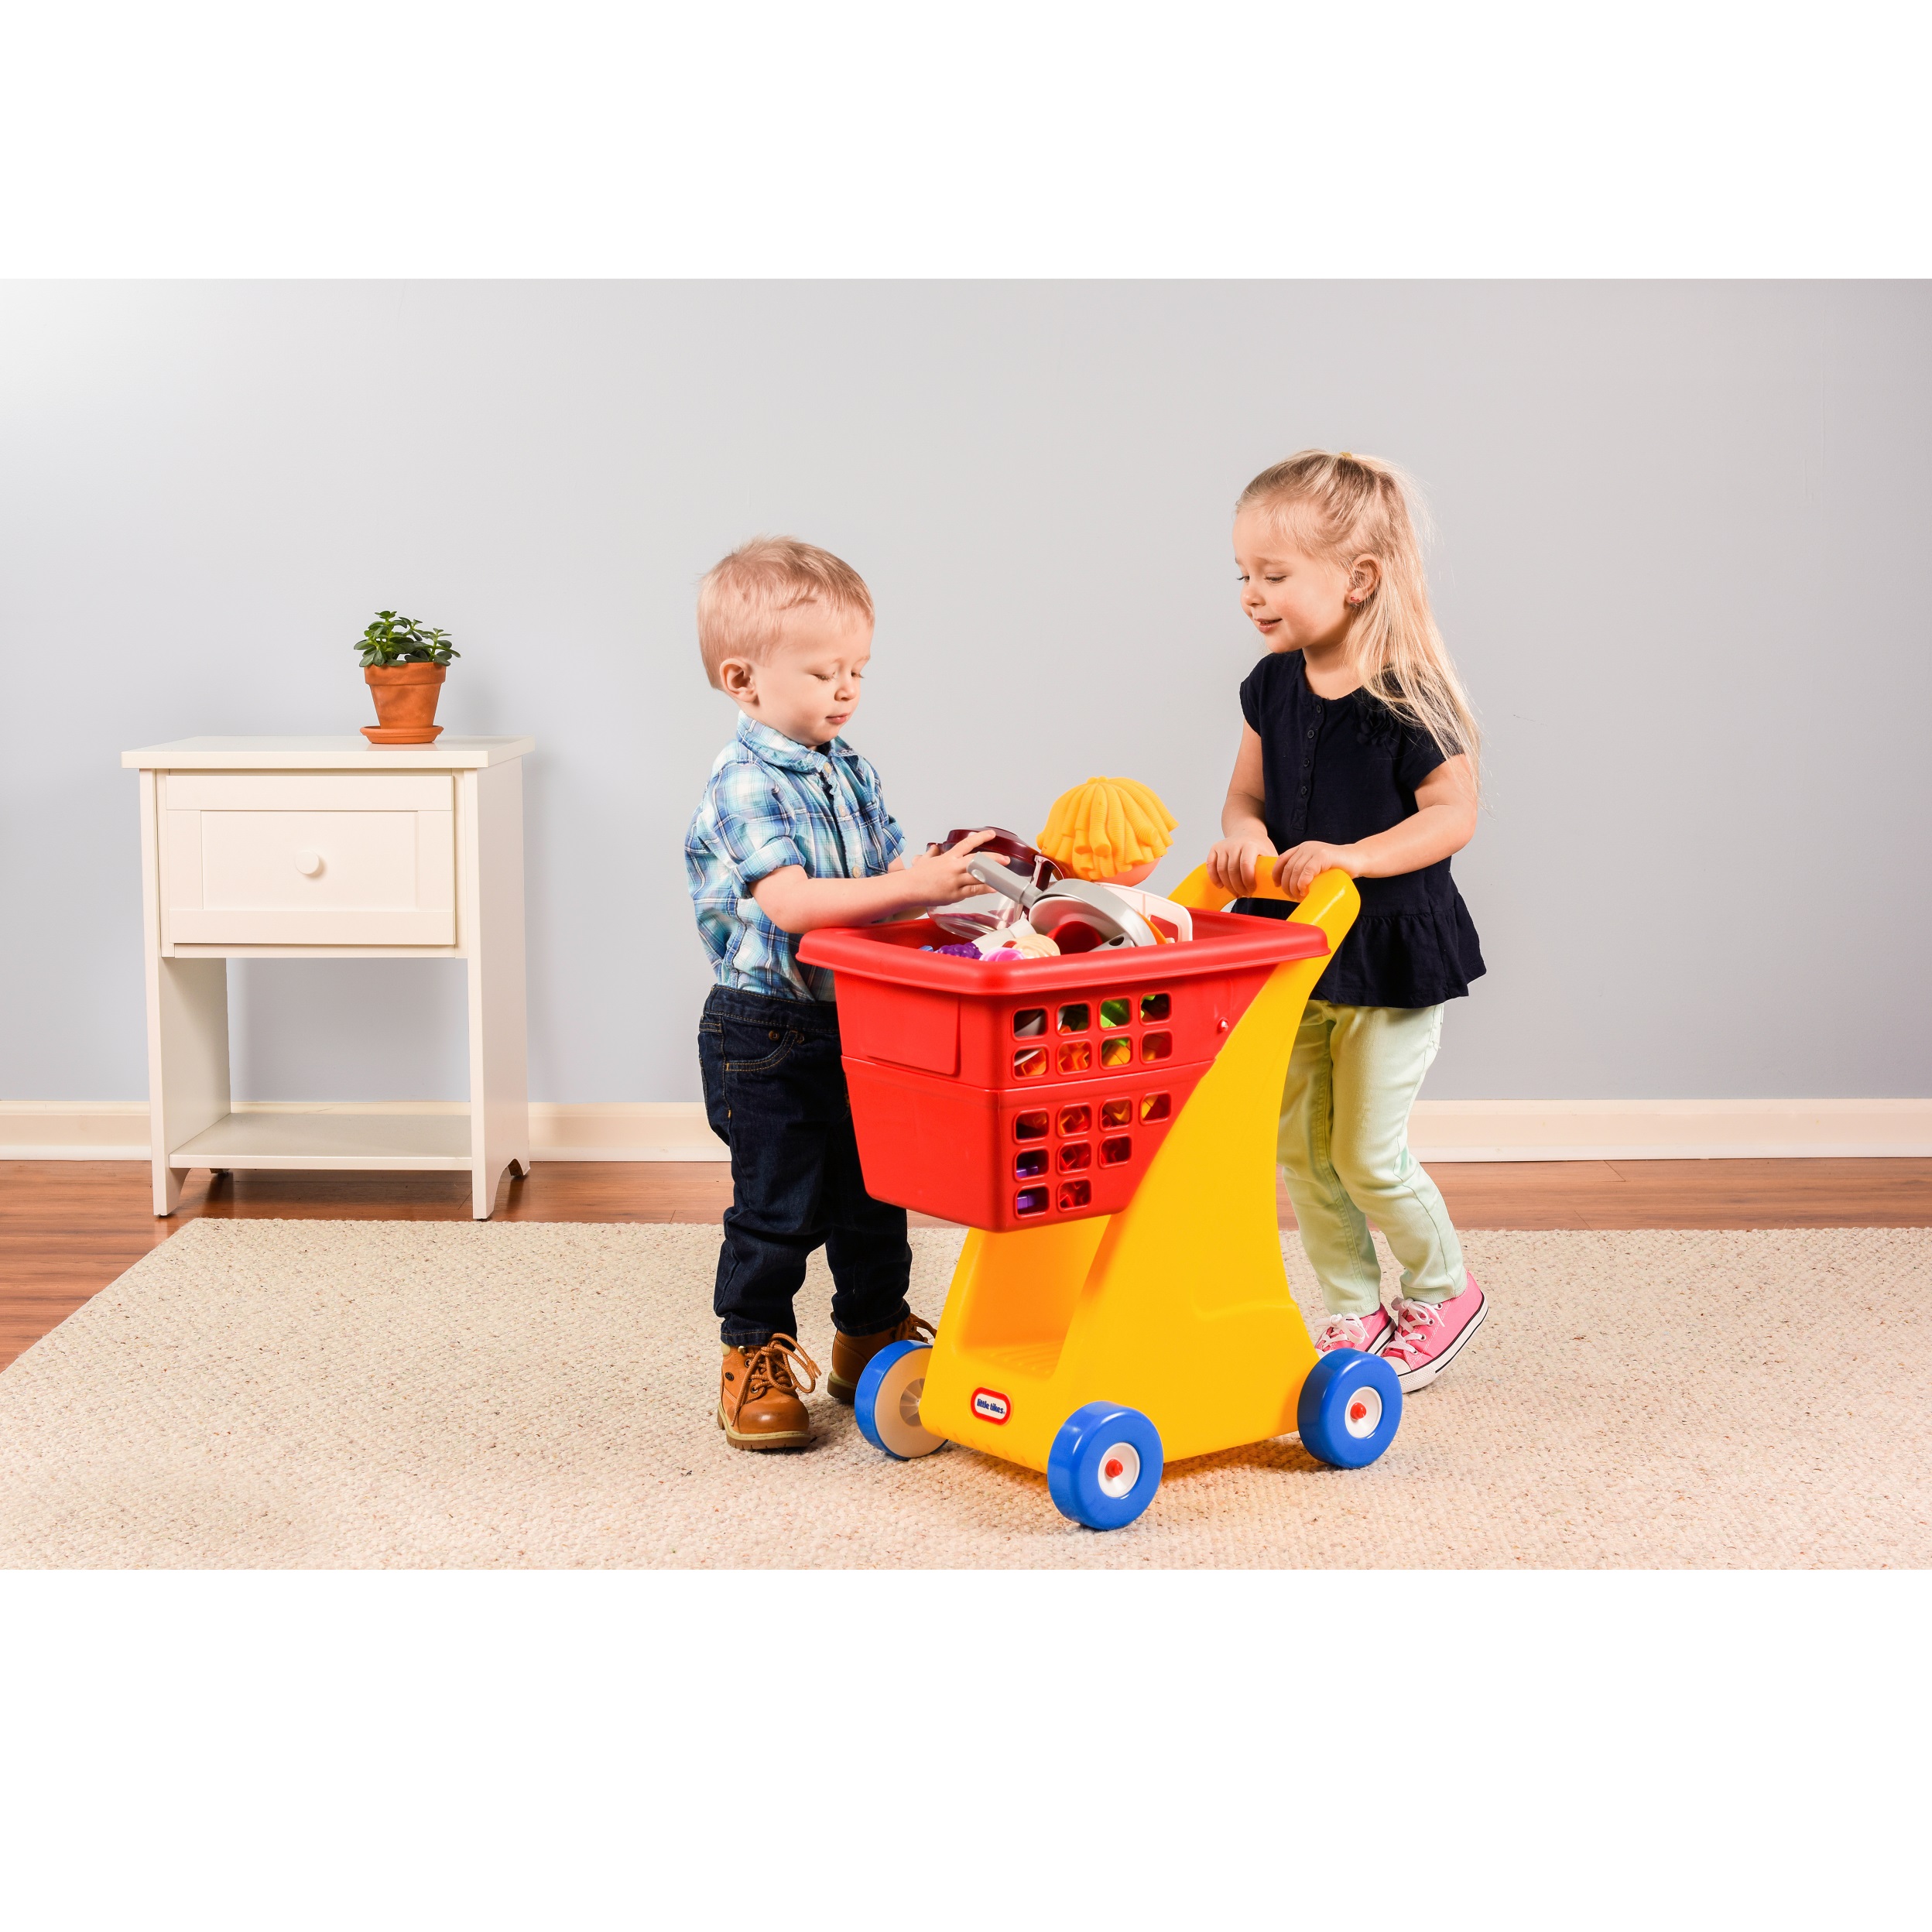 Little Tikes Toy Shopping Cart with Folding Seat, Multicolor, For Pretend Play Shopping Grocery Play Store for Kids Toddlers Girls Boys Ages 18+ months. - image 3 of 6